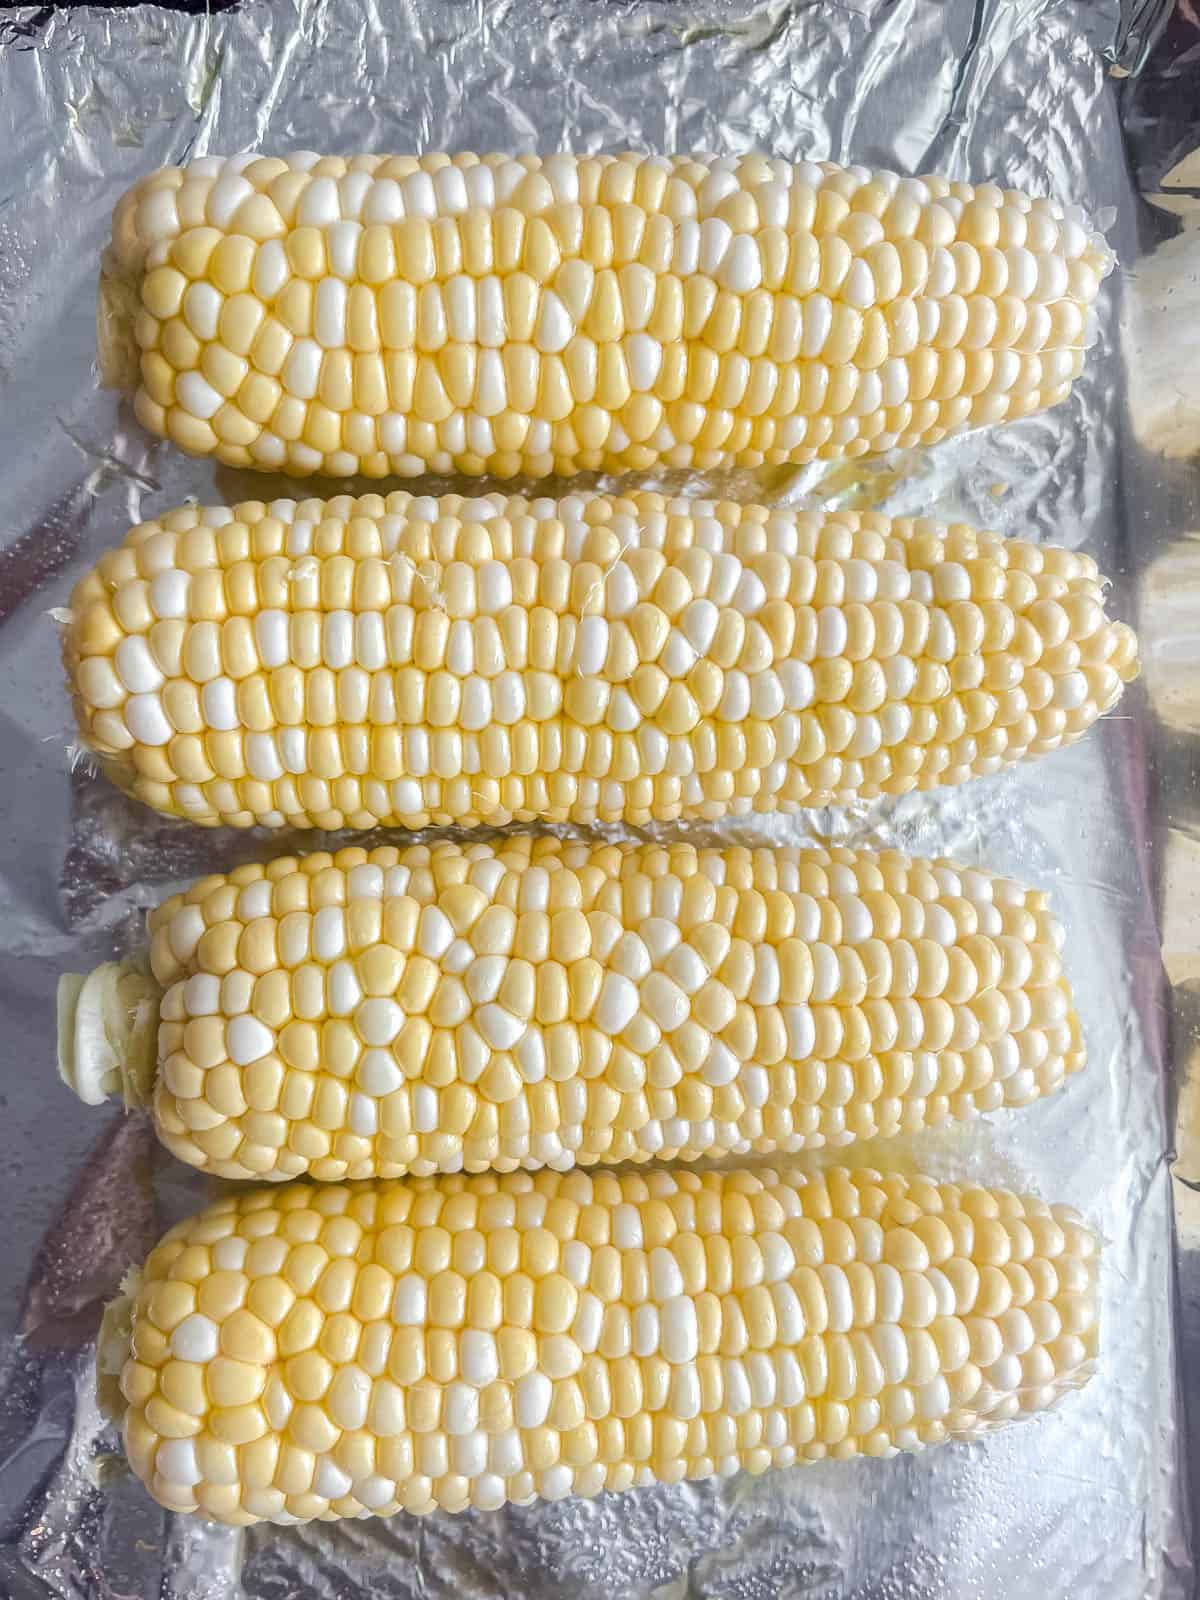 Raw corn before cooking.